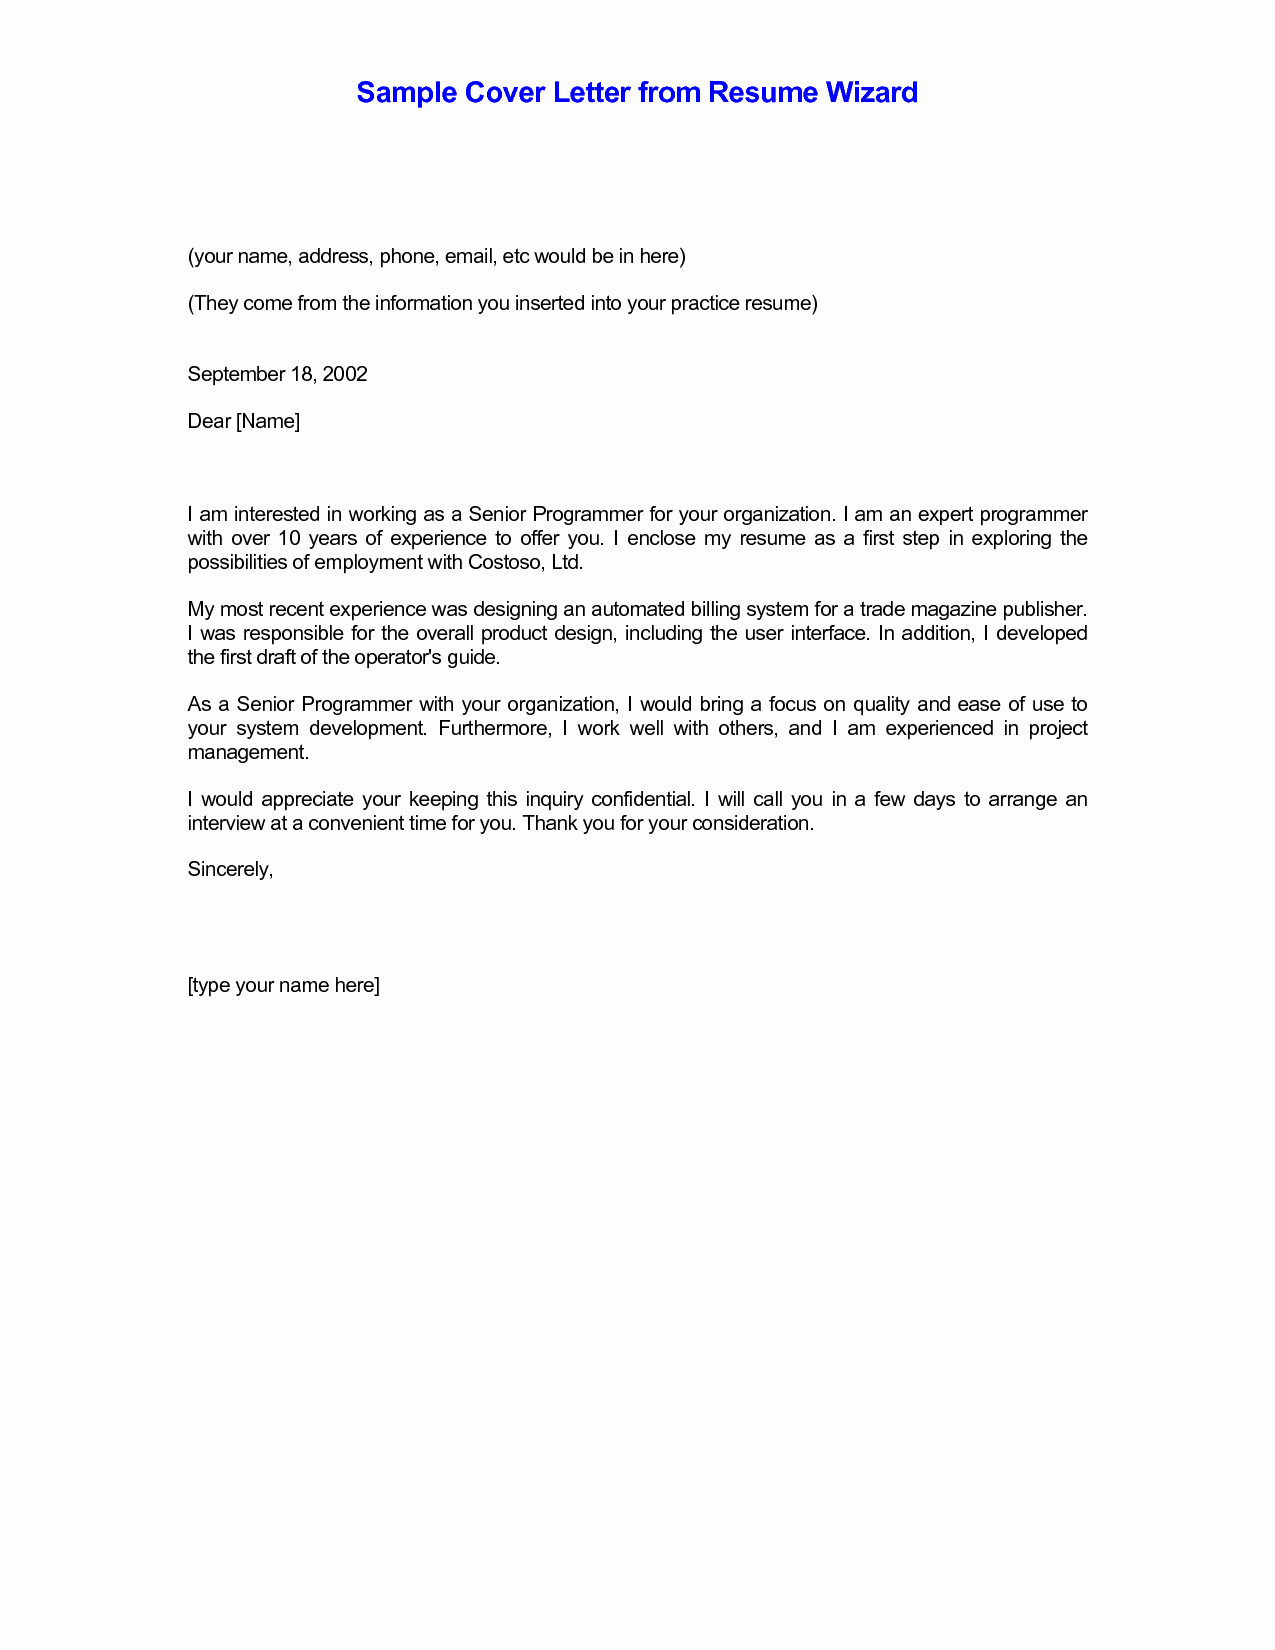 Email Resume Cover Letter Examples Sample Cover Letter for